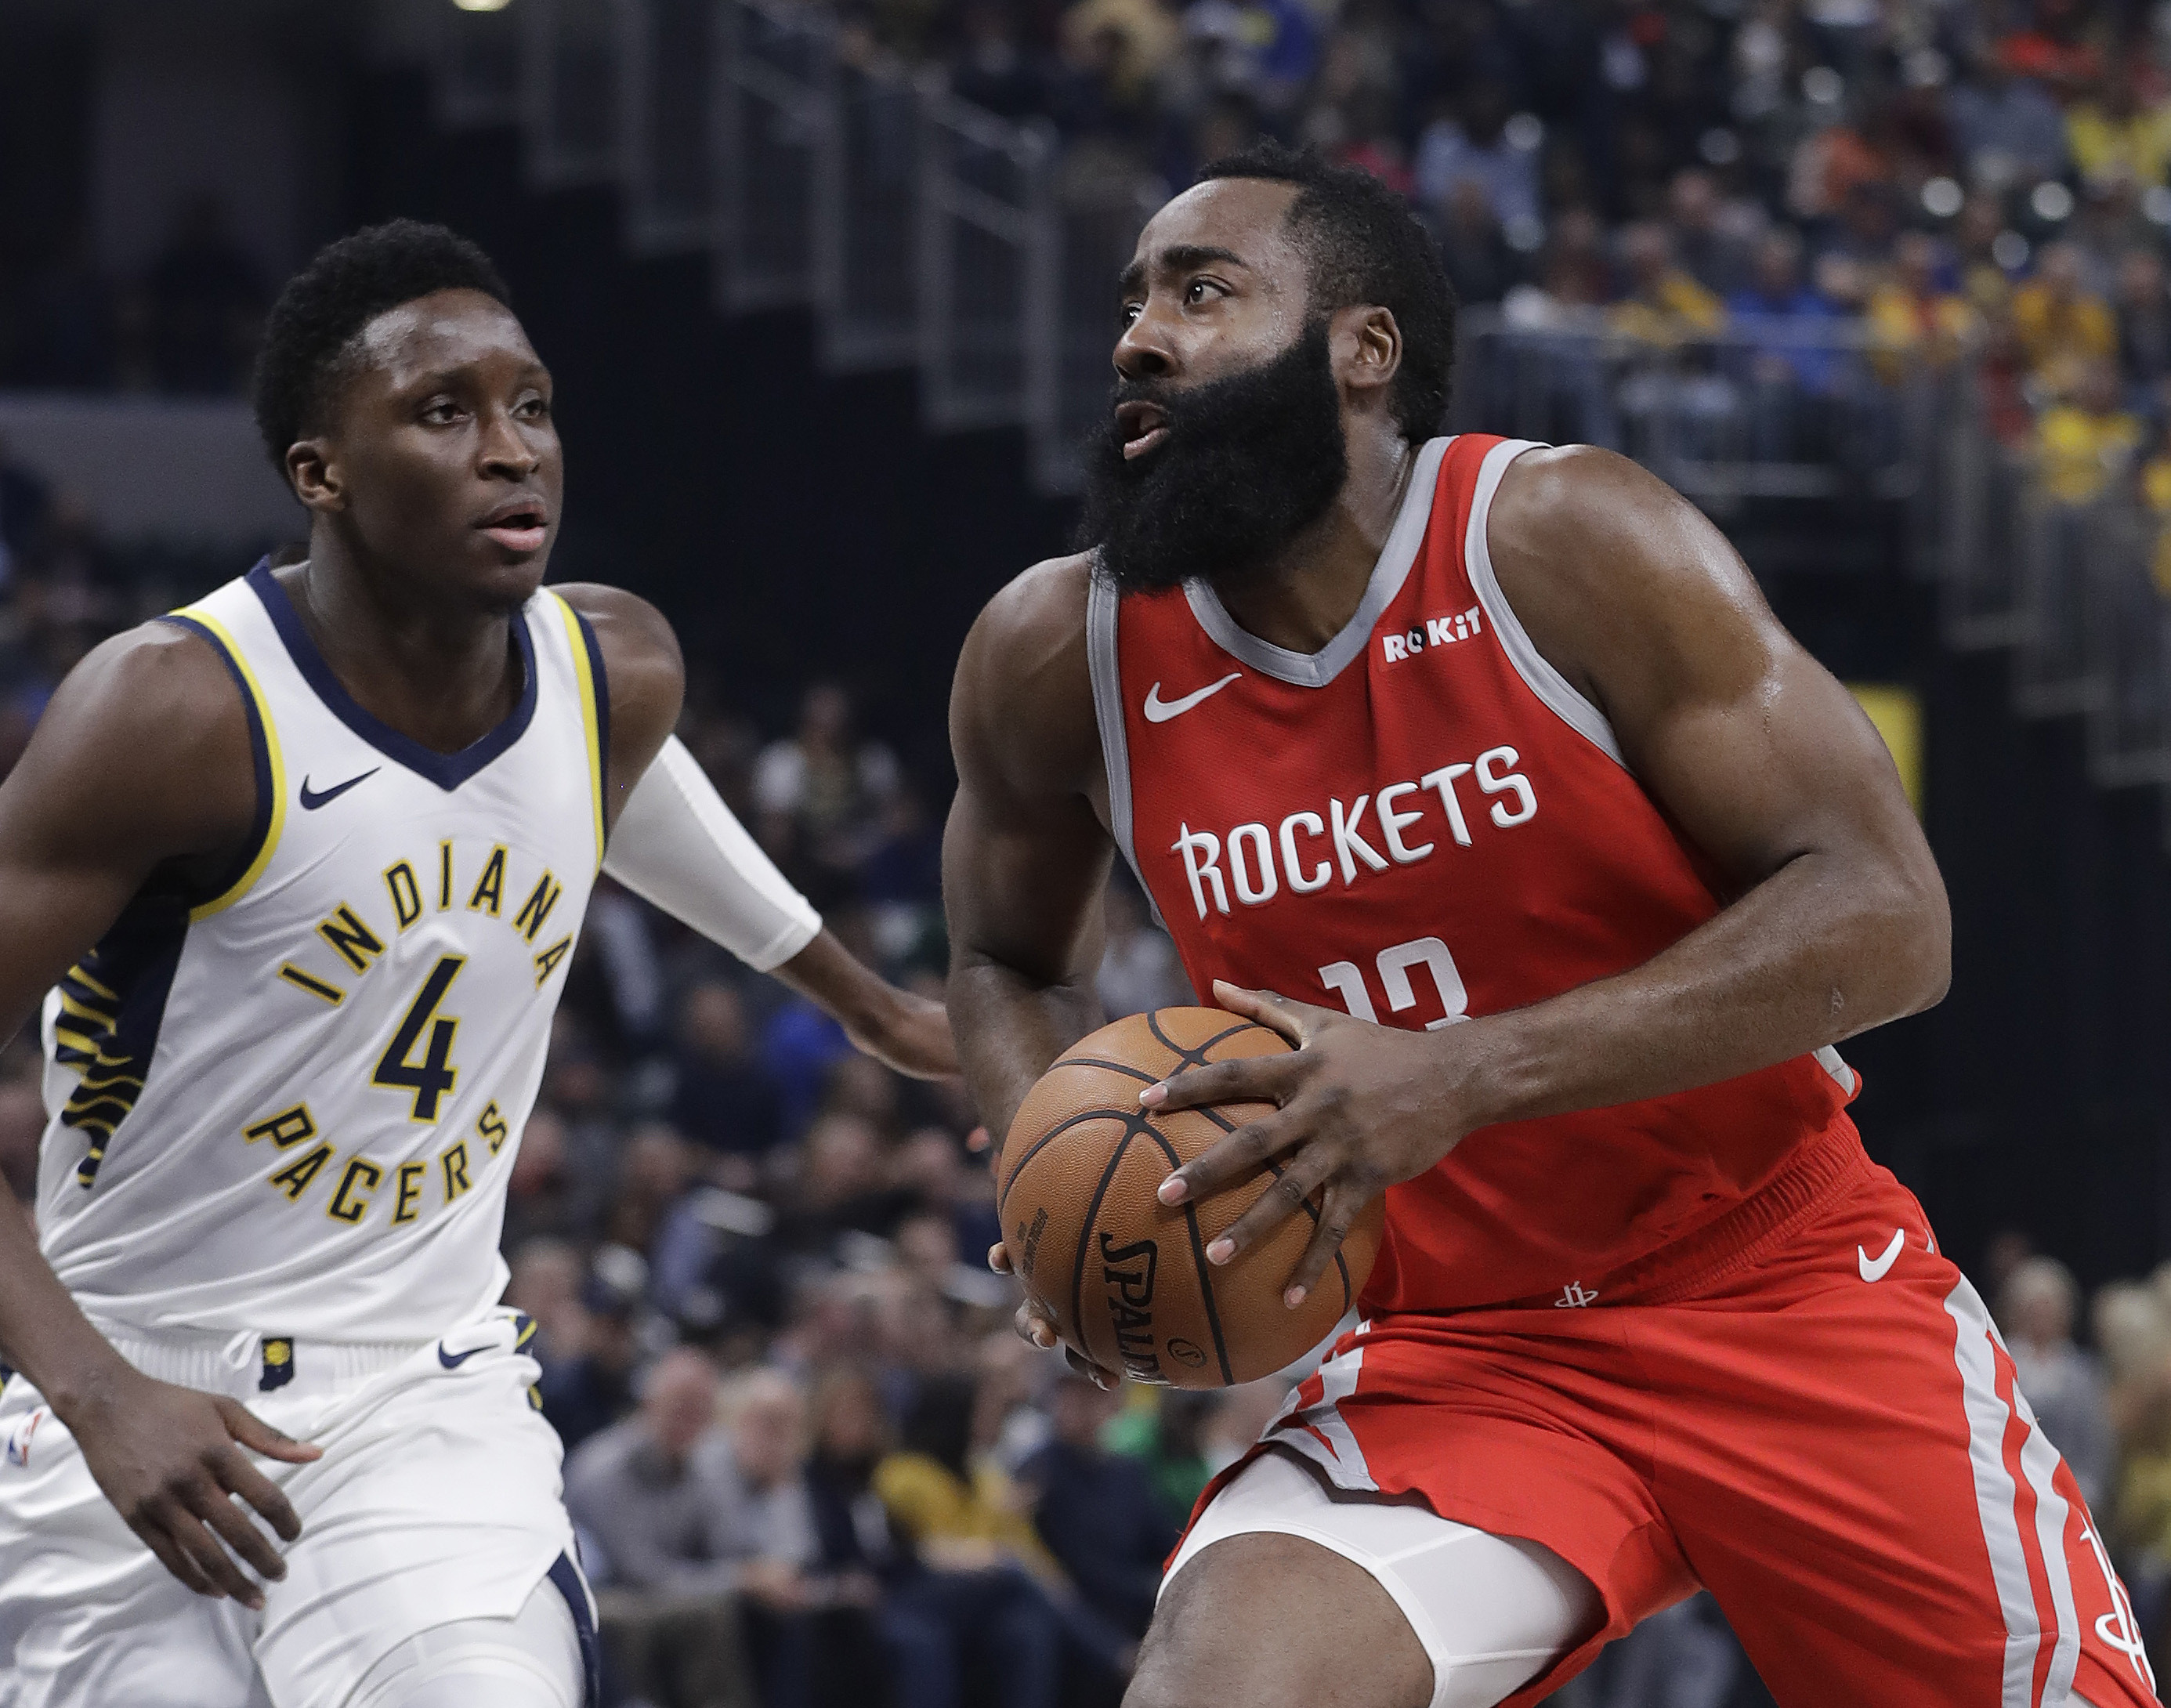 Harden’s late 3 helps Houston rocket past Pacers 98-94